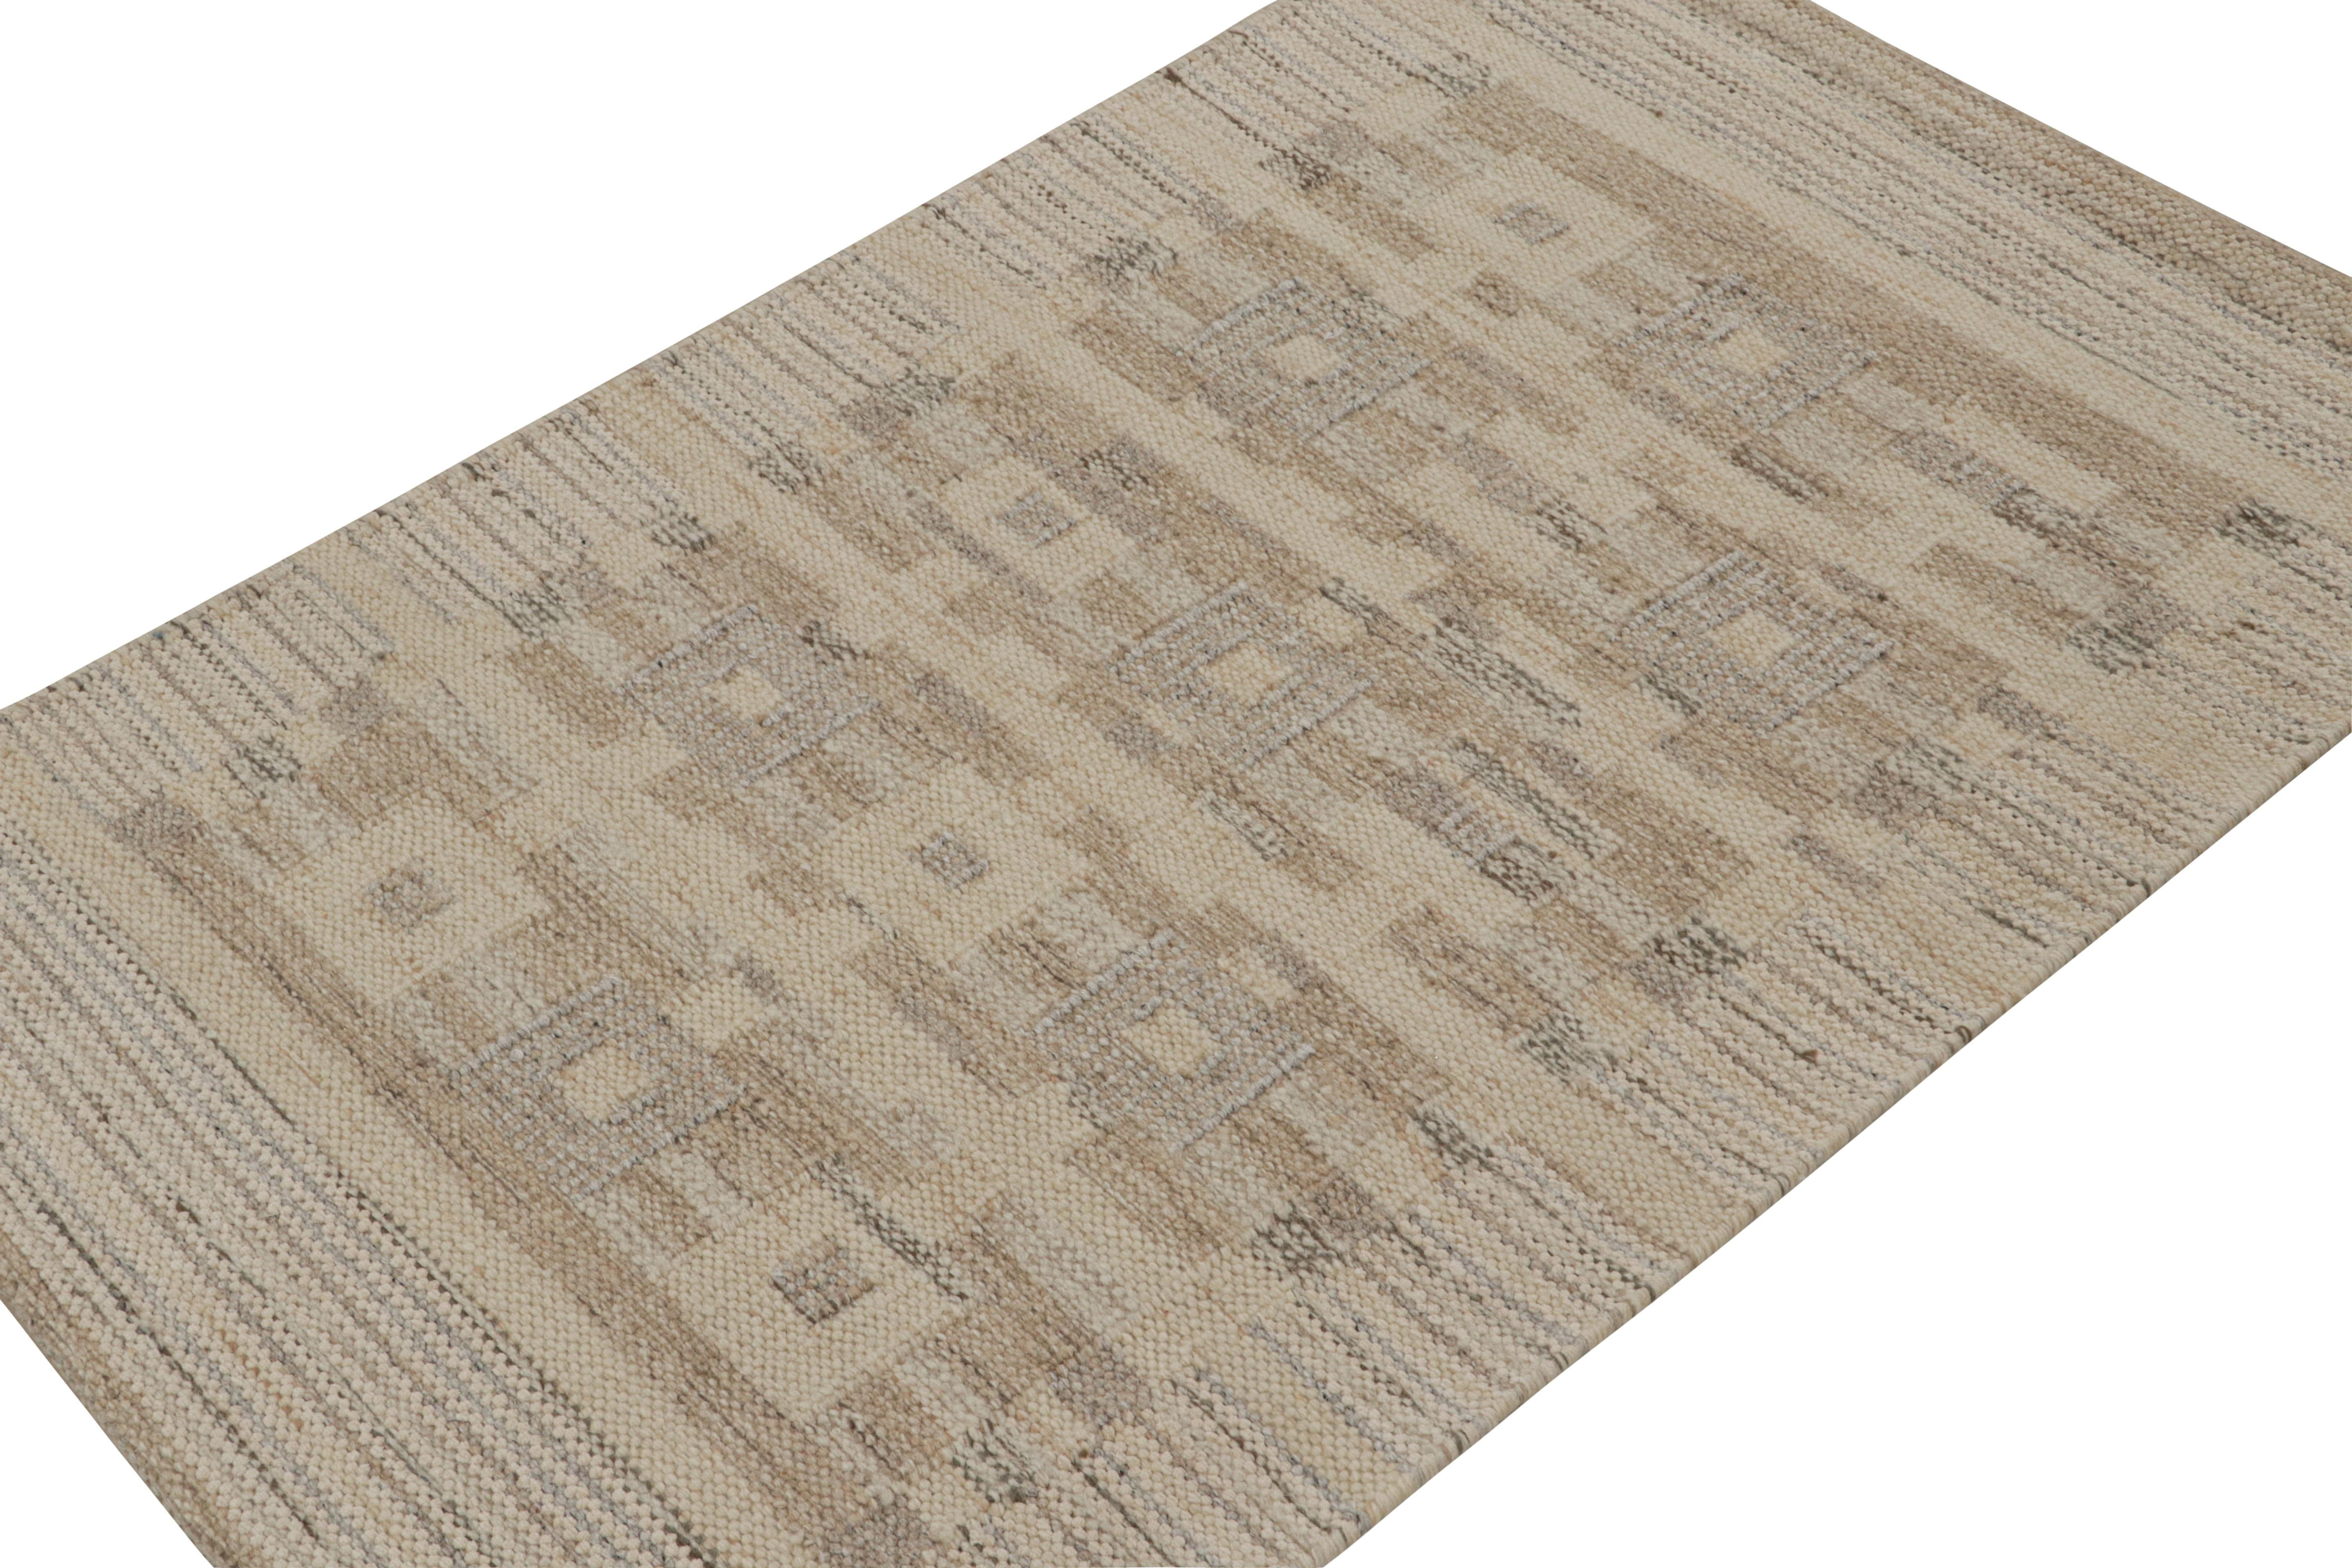 A smart 3x5 Swedish style kilim from our award-winning Scandinavian flat weave collection. Handwoven in wool & undyed natural yarn.

On the Design: 

This rug enjoys geometric patterns in comfortable brown & gray. Keen eyes will admire undyed,